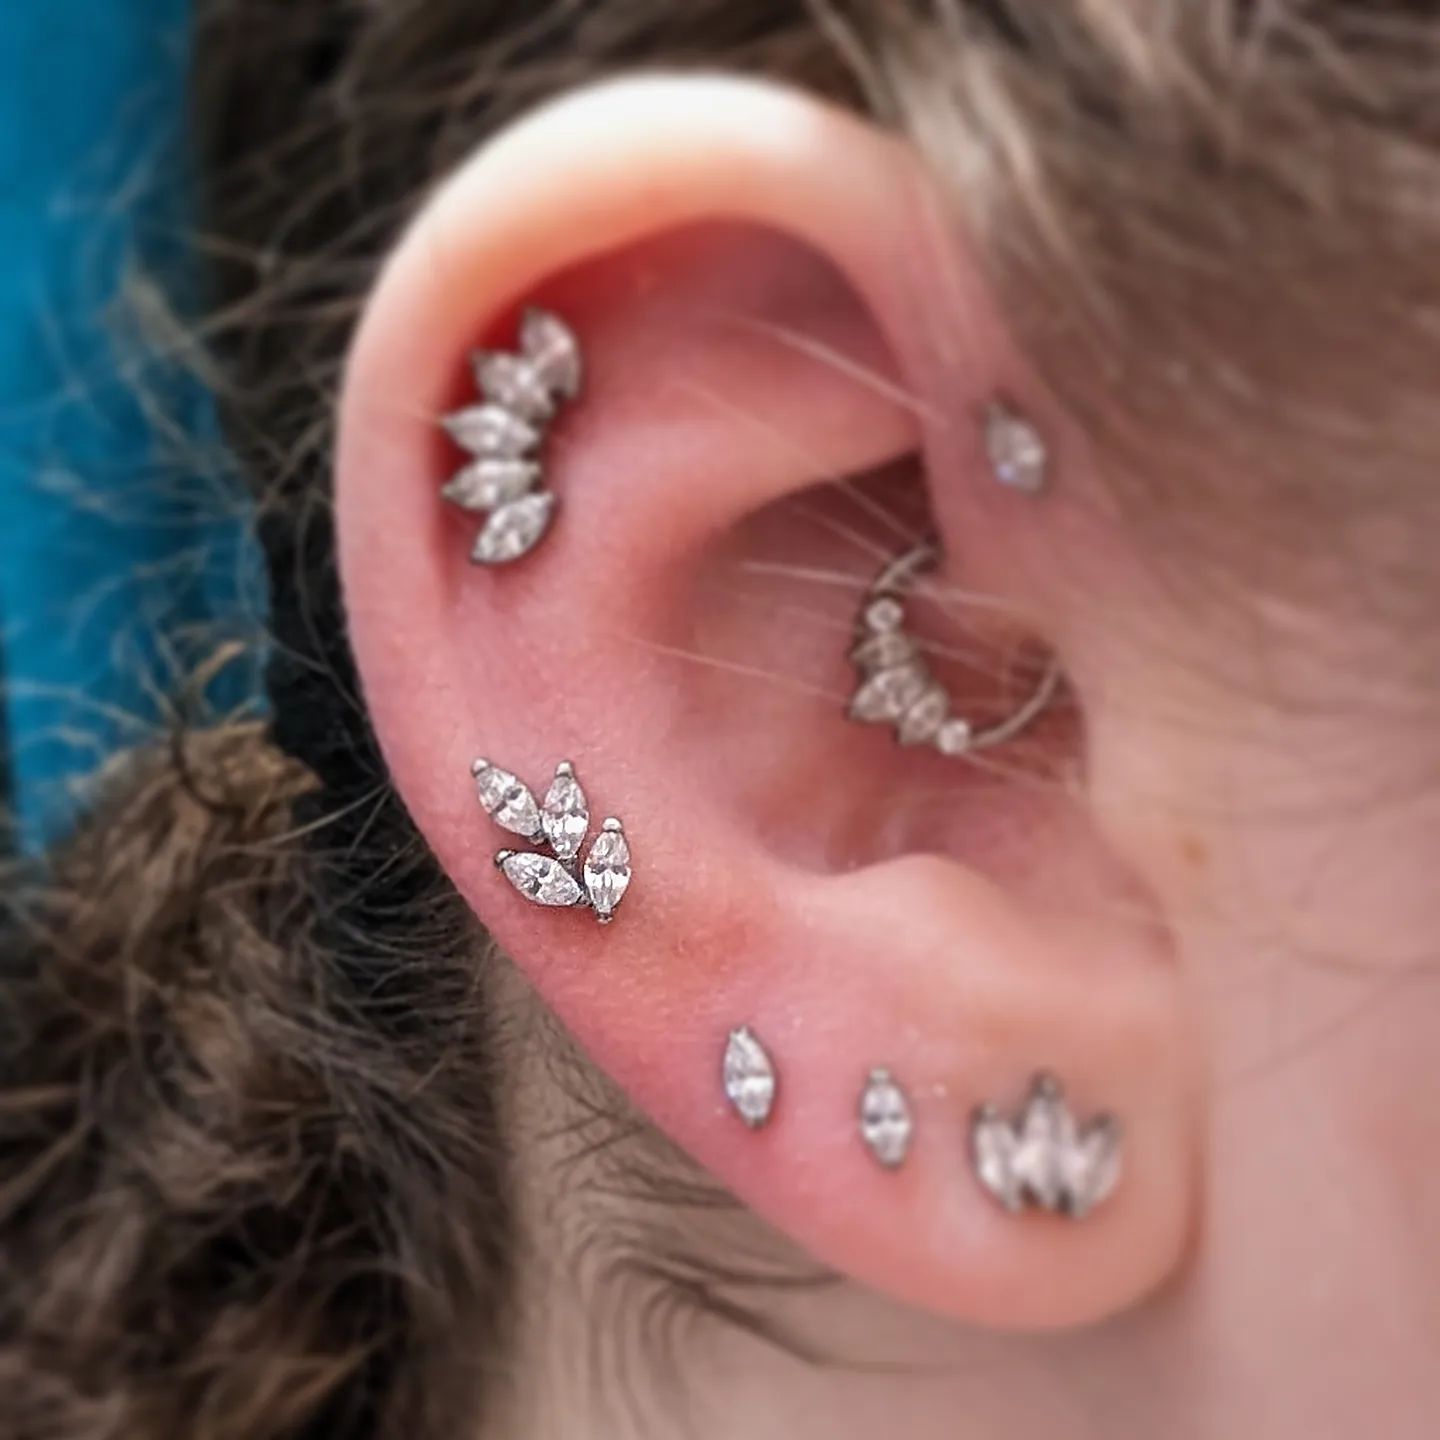 If we don't have what you want for your fresh or healed piercing, let us know and we'll order it for you!!

Fresh mid helix done this afternoon with customers own choice of titanium jewellery from wholesalebodyjewellery . Have a look at what they have and let us know if you want us to place a custom order.

                